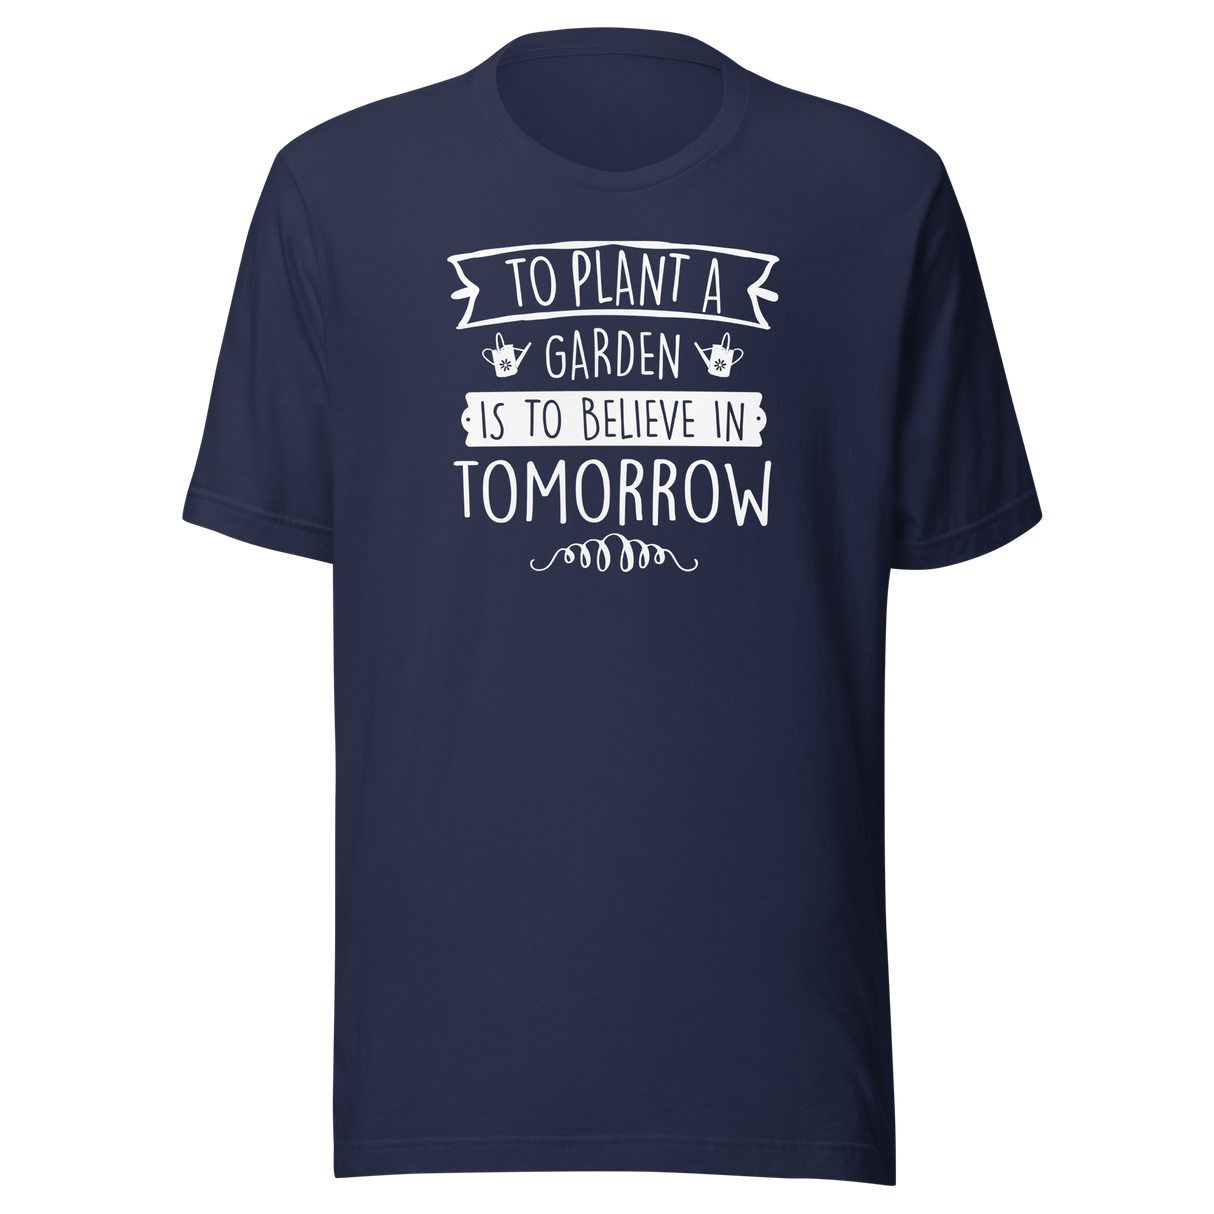 To Plant A Garden Is To Believe In Tomorrow - Plants Tee - Flowers T-Shirt - Flowers Tee - Nature T-Shirt - Gardening Tee